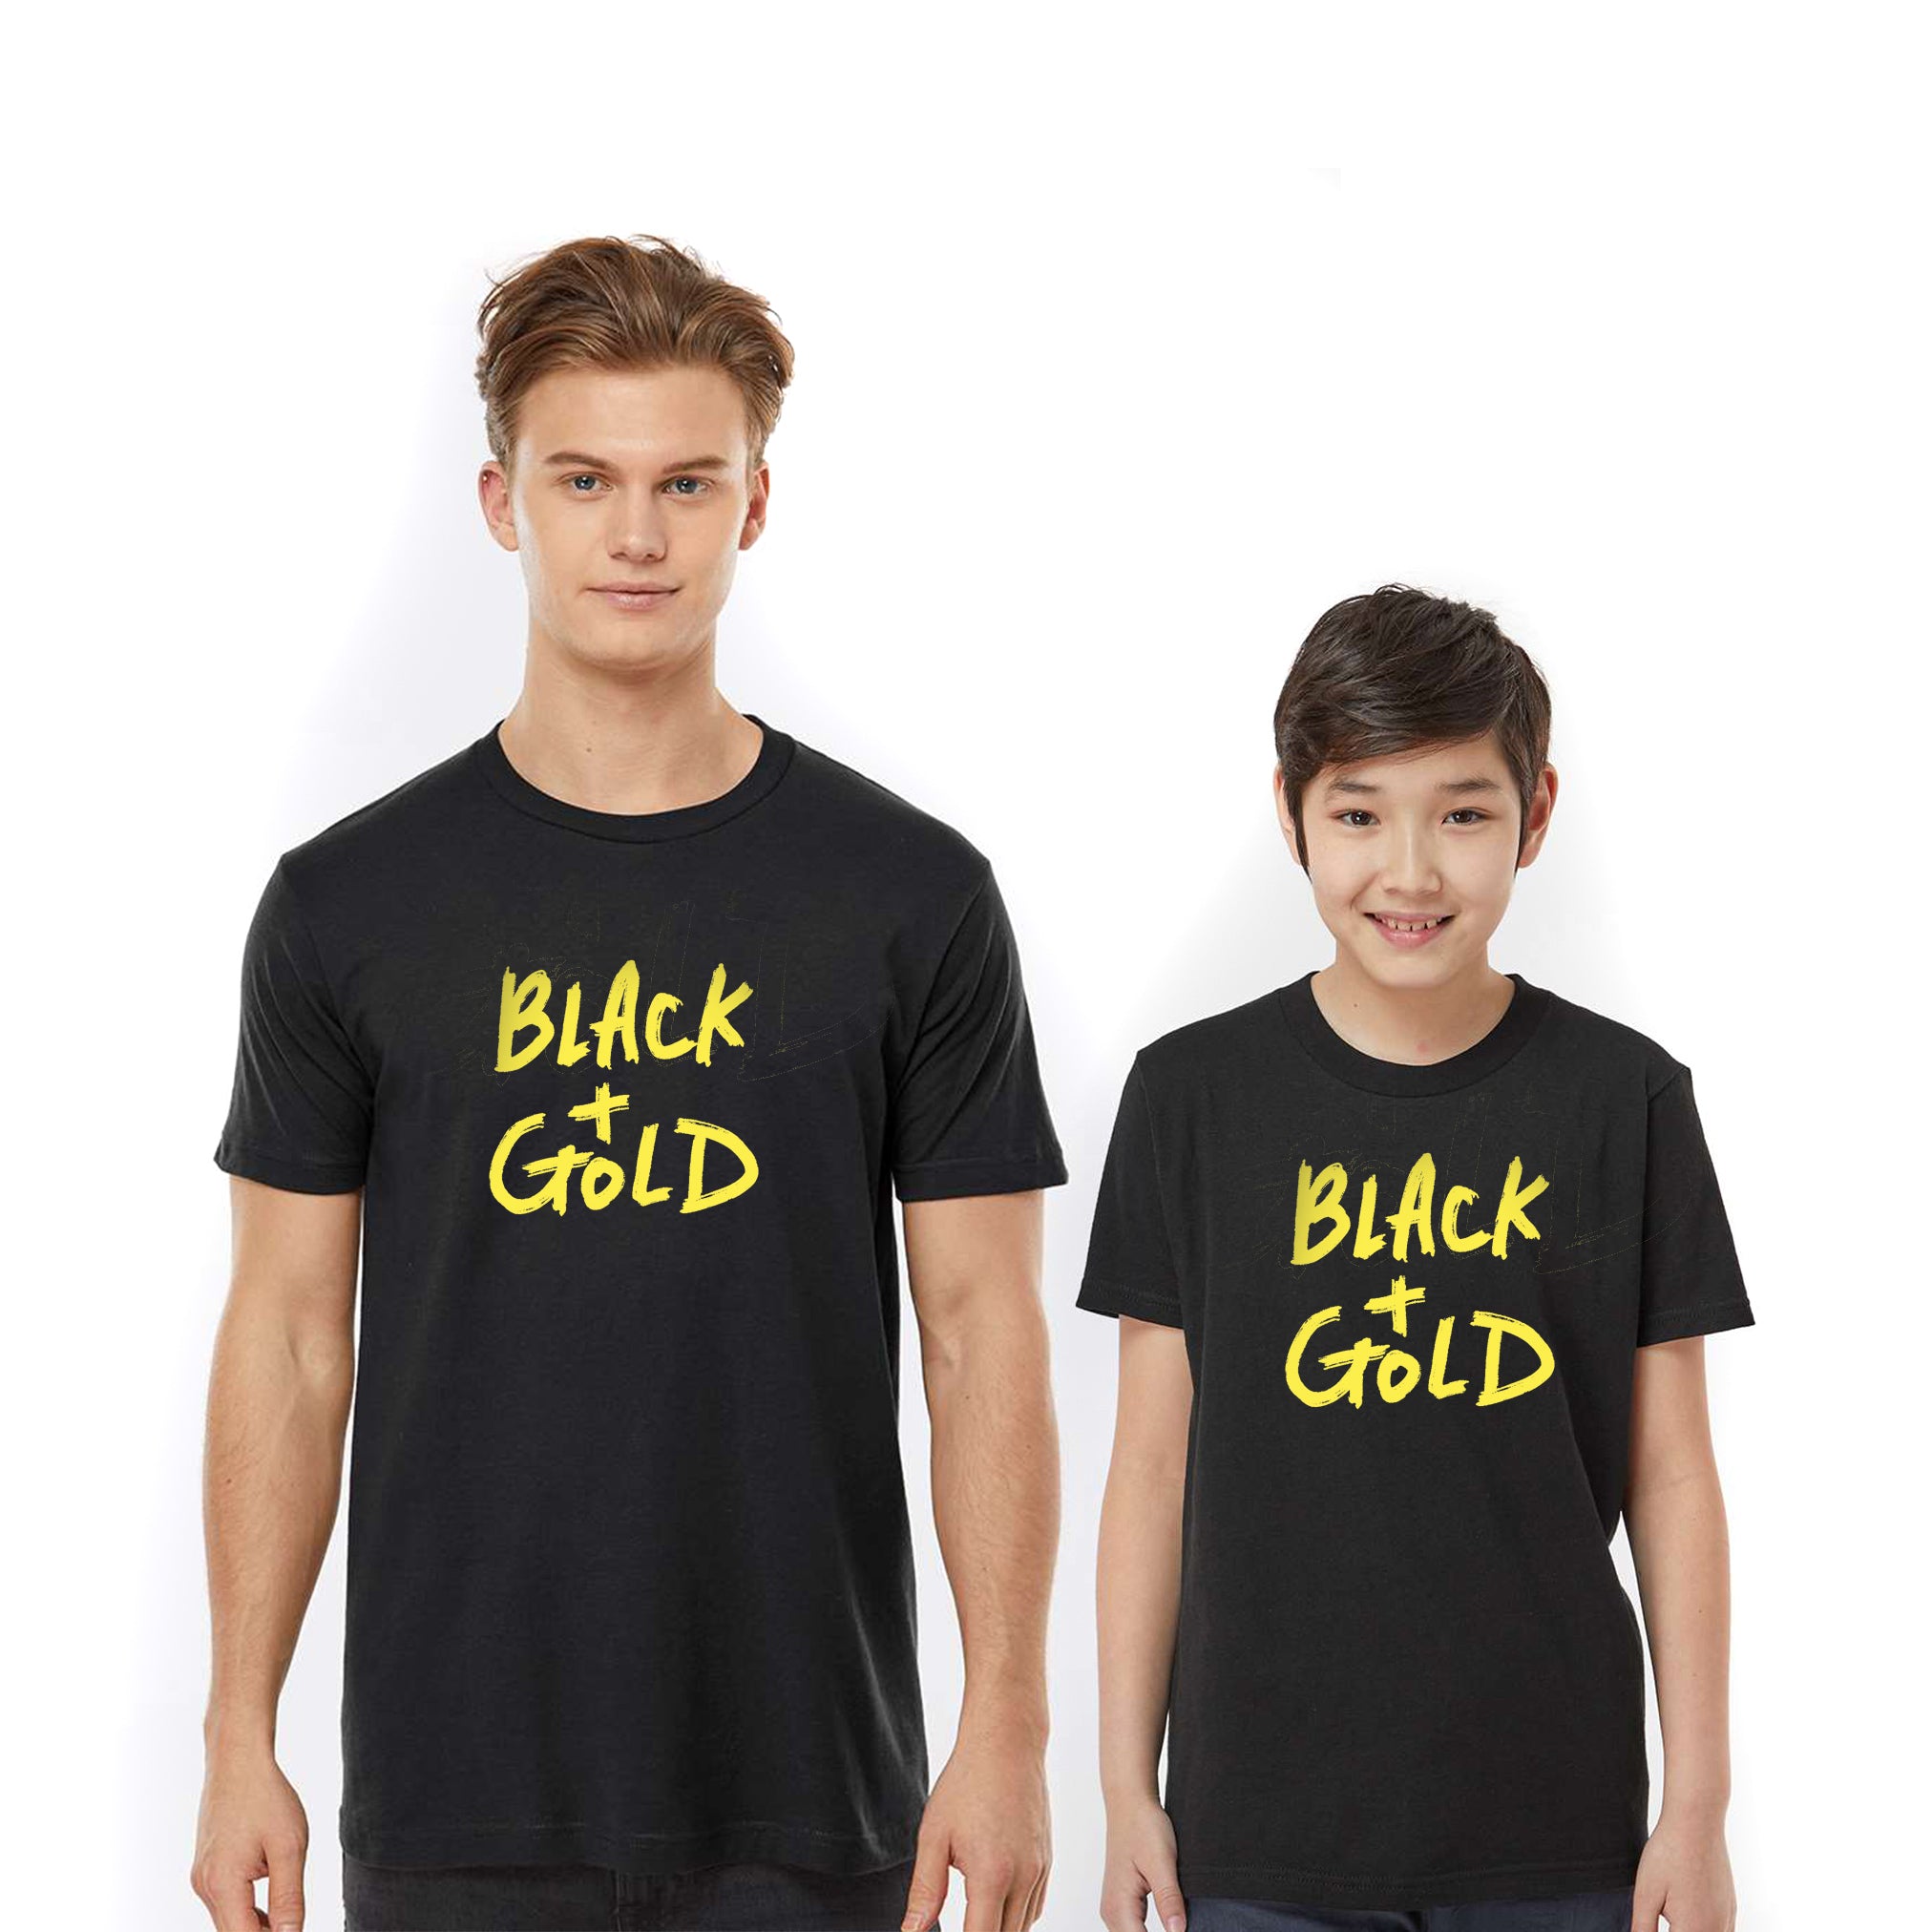 BLACK & GOLD : Youth T-shirt, Columbus Crew, Black and Yellow, Fan, Soccer